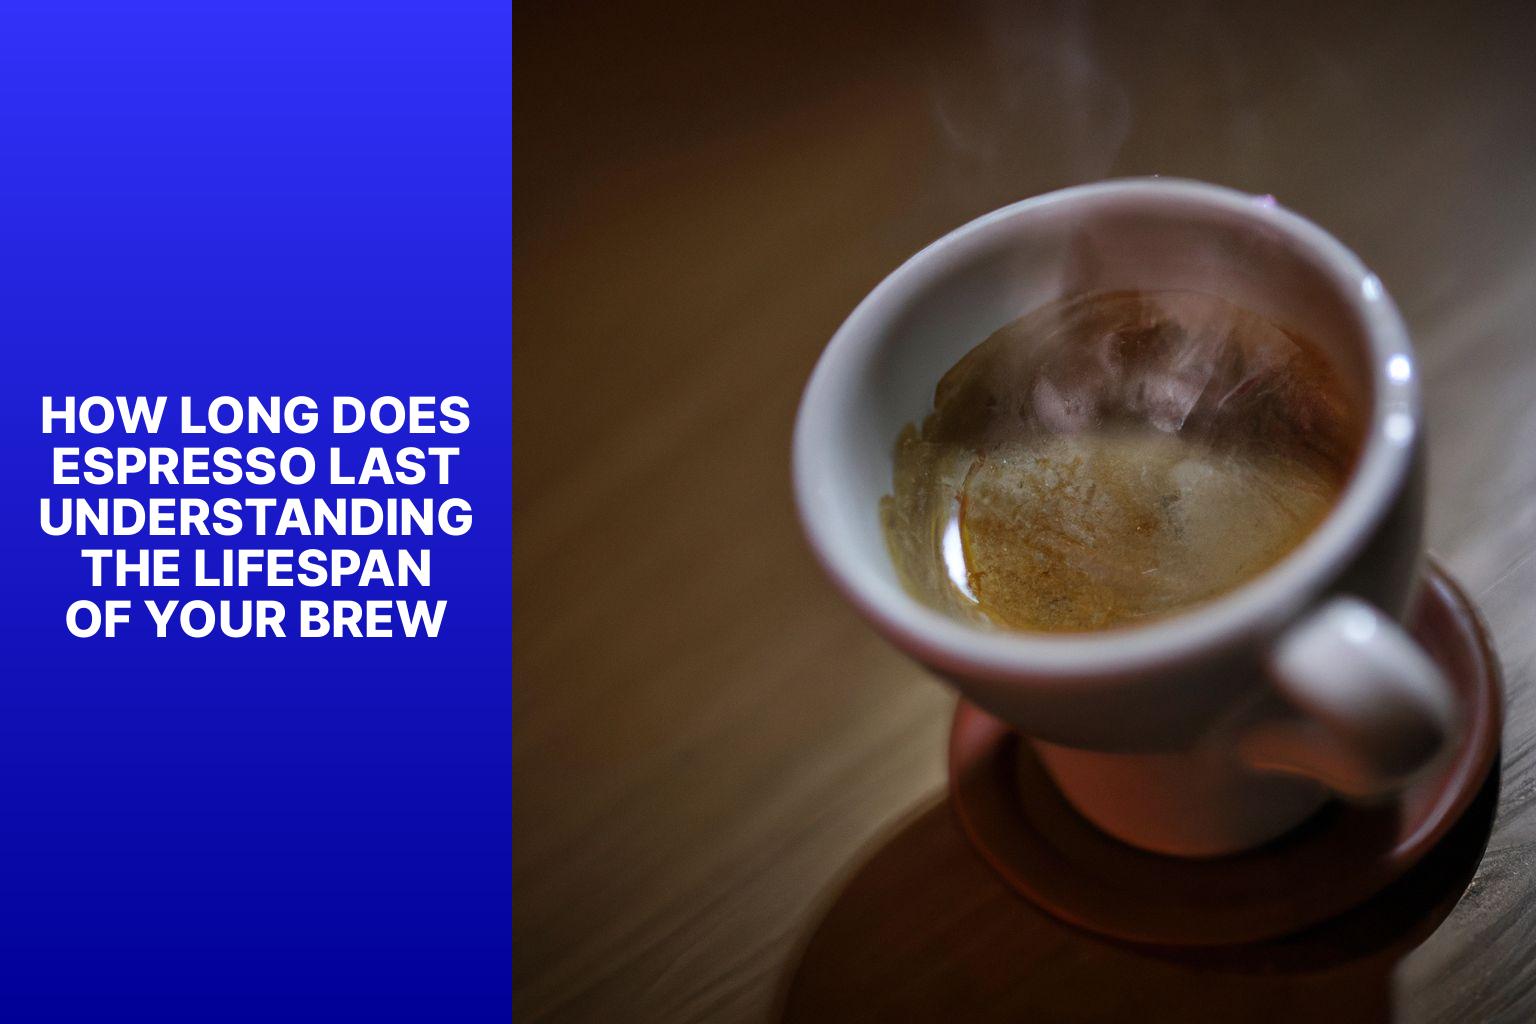 How Long Does Espresso Last? Understanding the Lifespan of Your Brew